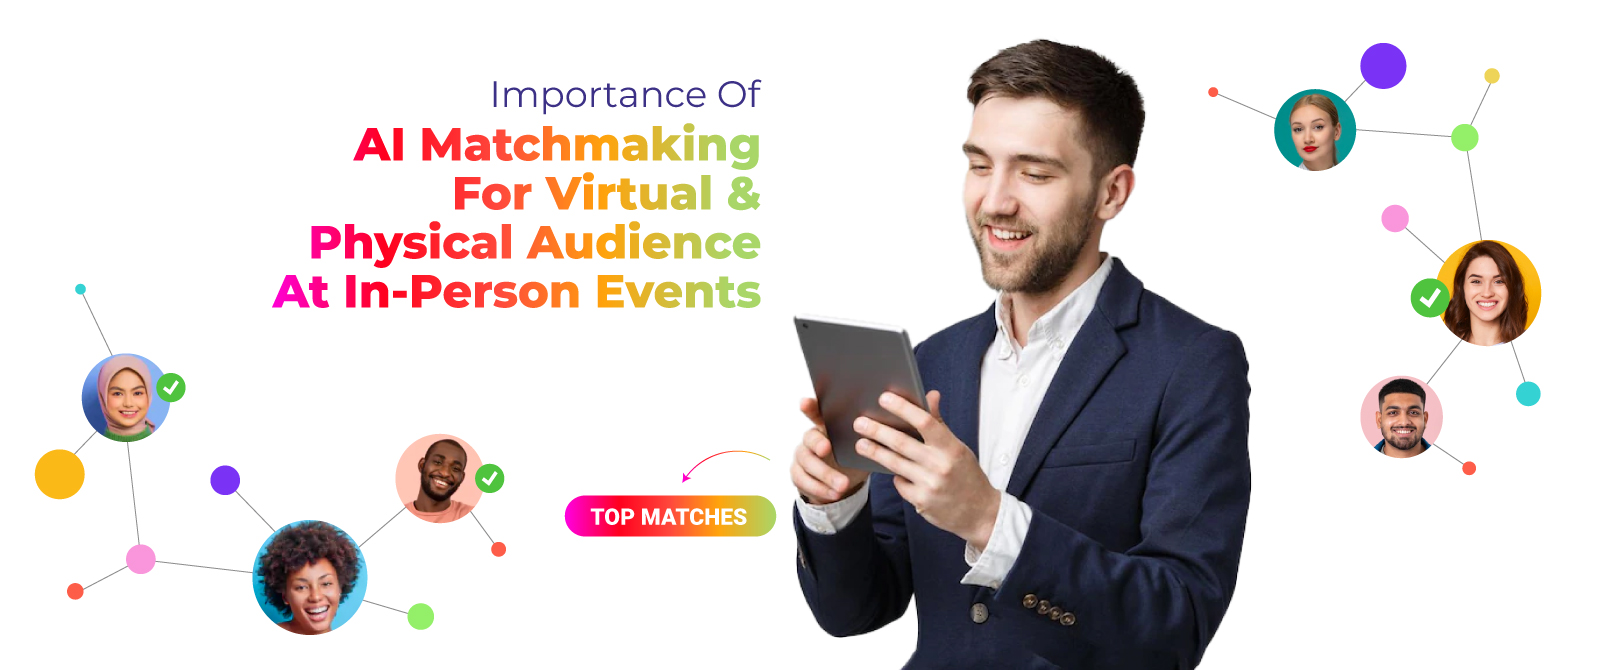 Importance Of AI Matchmaking For Virtual & Physical Audience At In-Person Events